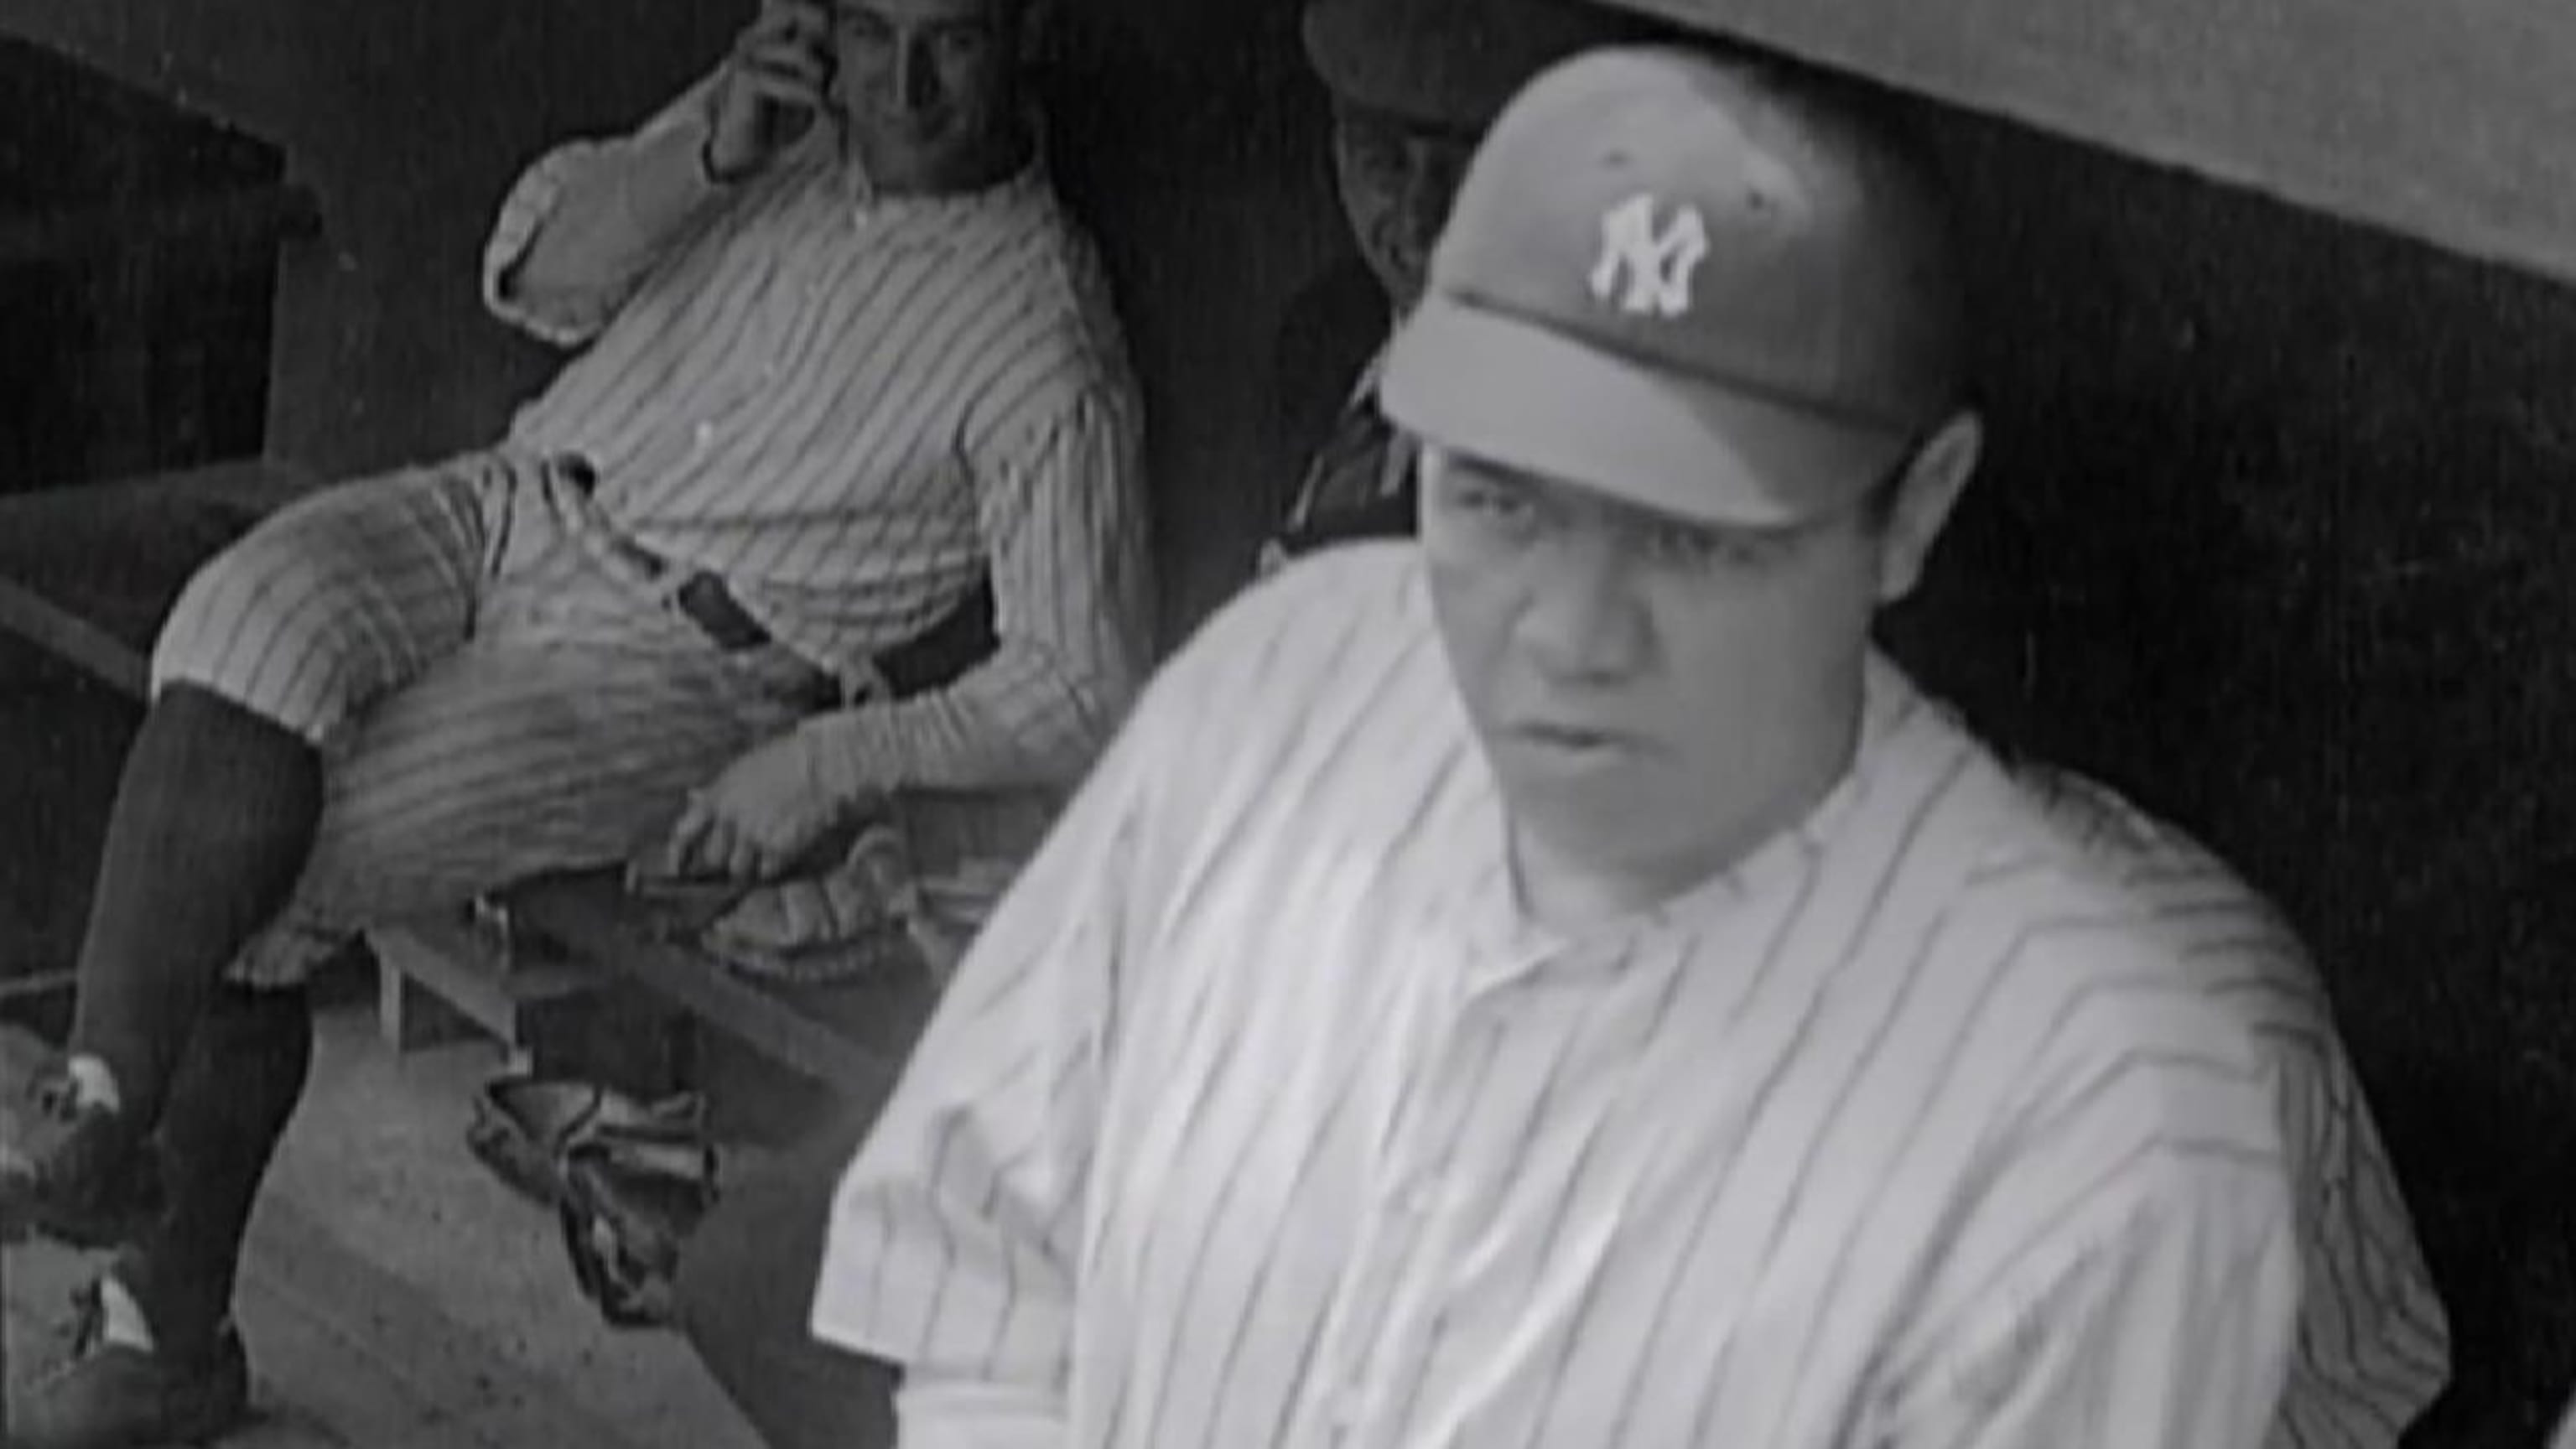 Babe Ruth and Lou Gehrig come to life in unearthed video